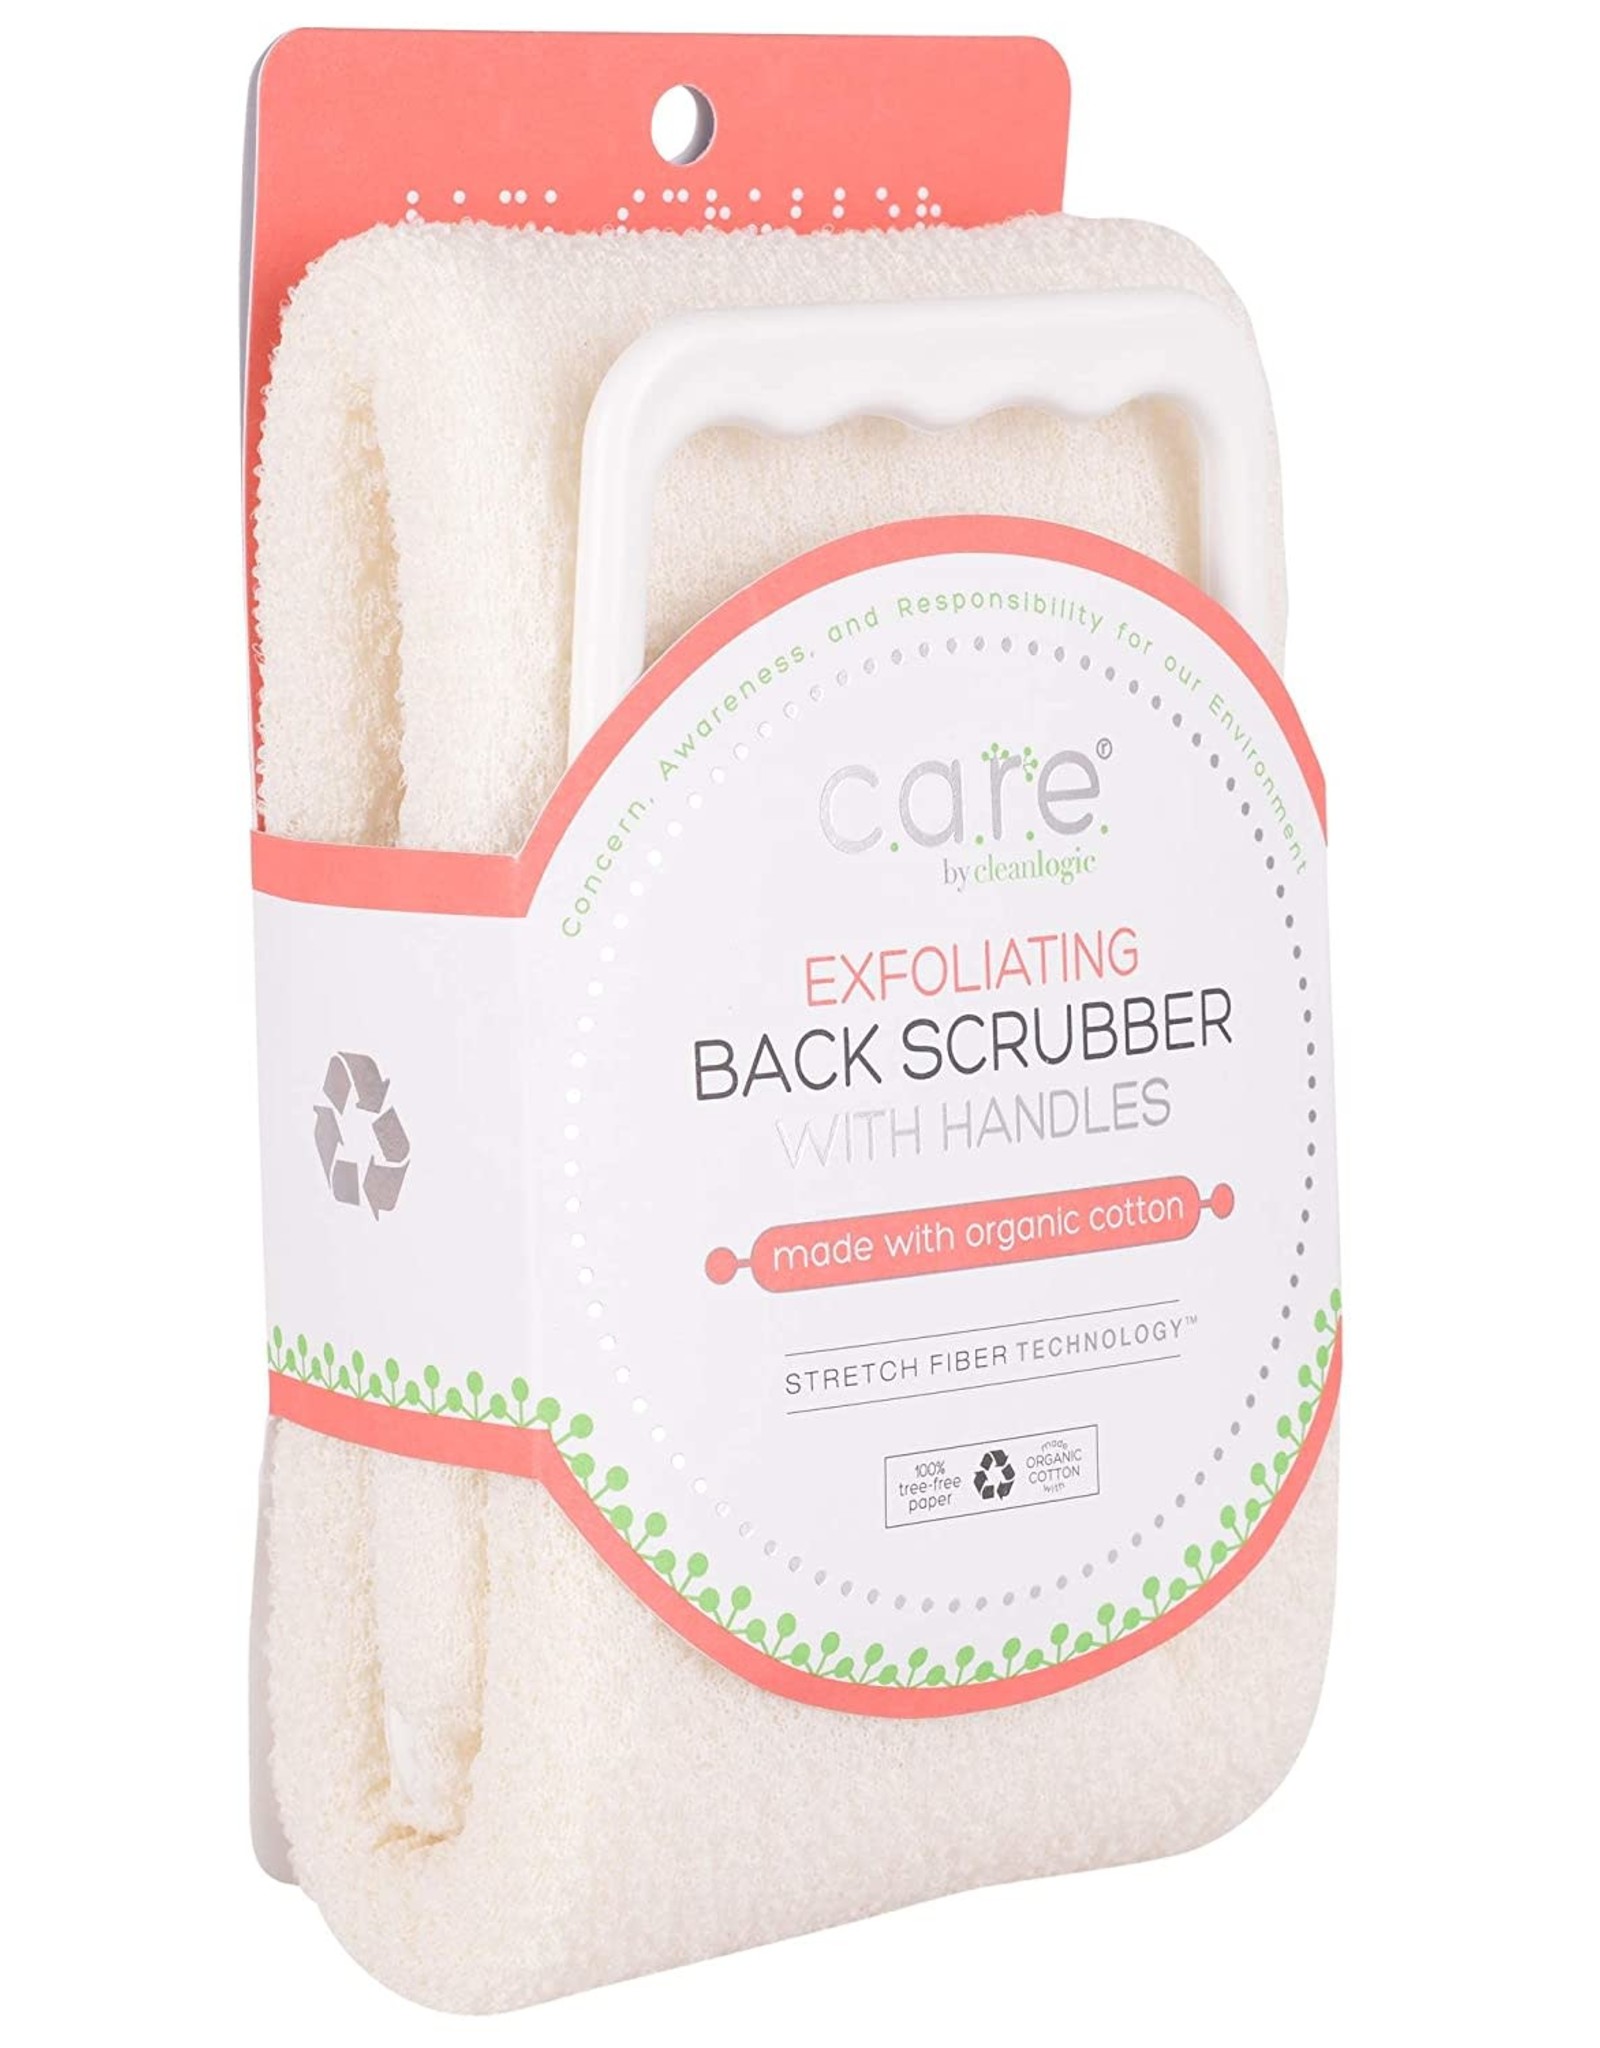 CARE BY CLEANLOGIC X CleanLogic Back Scrubber with Handles